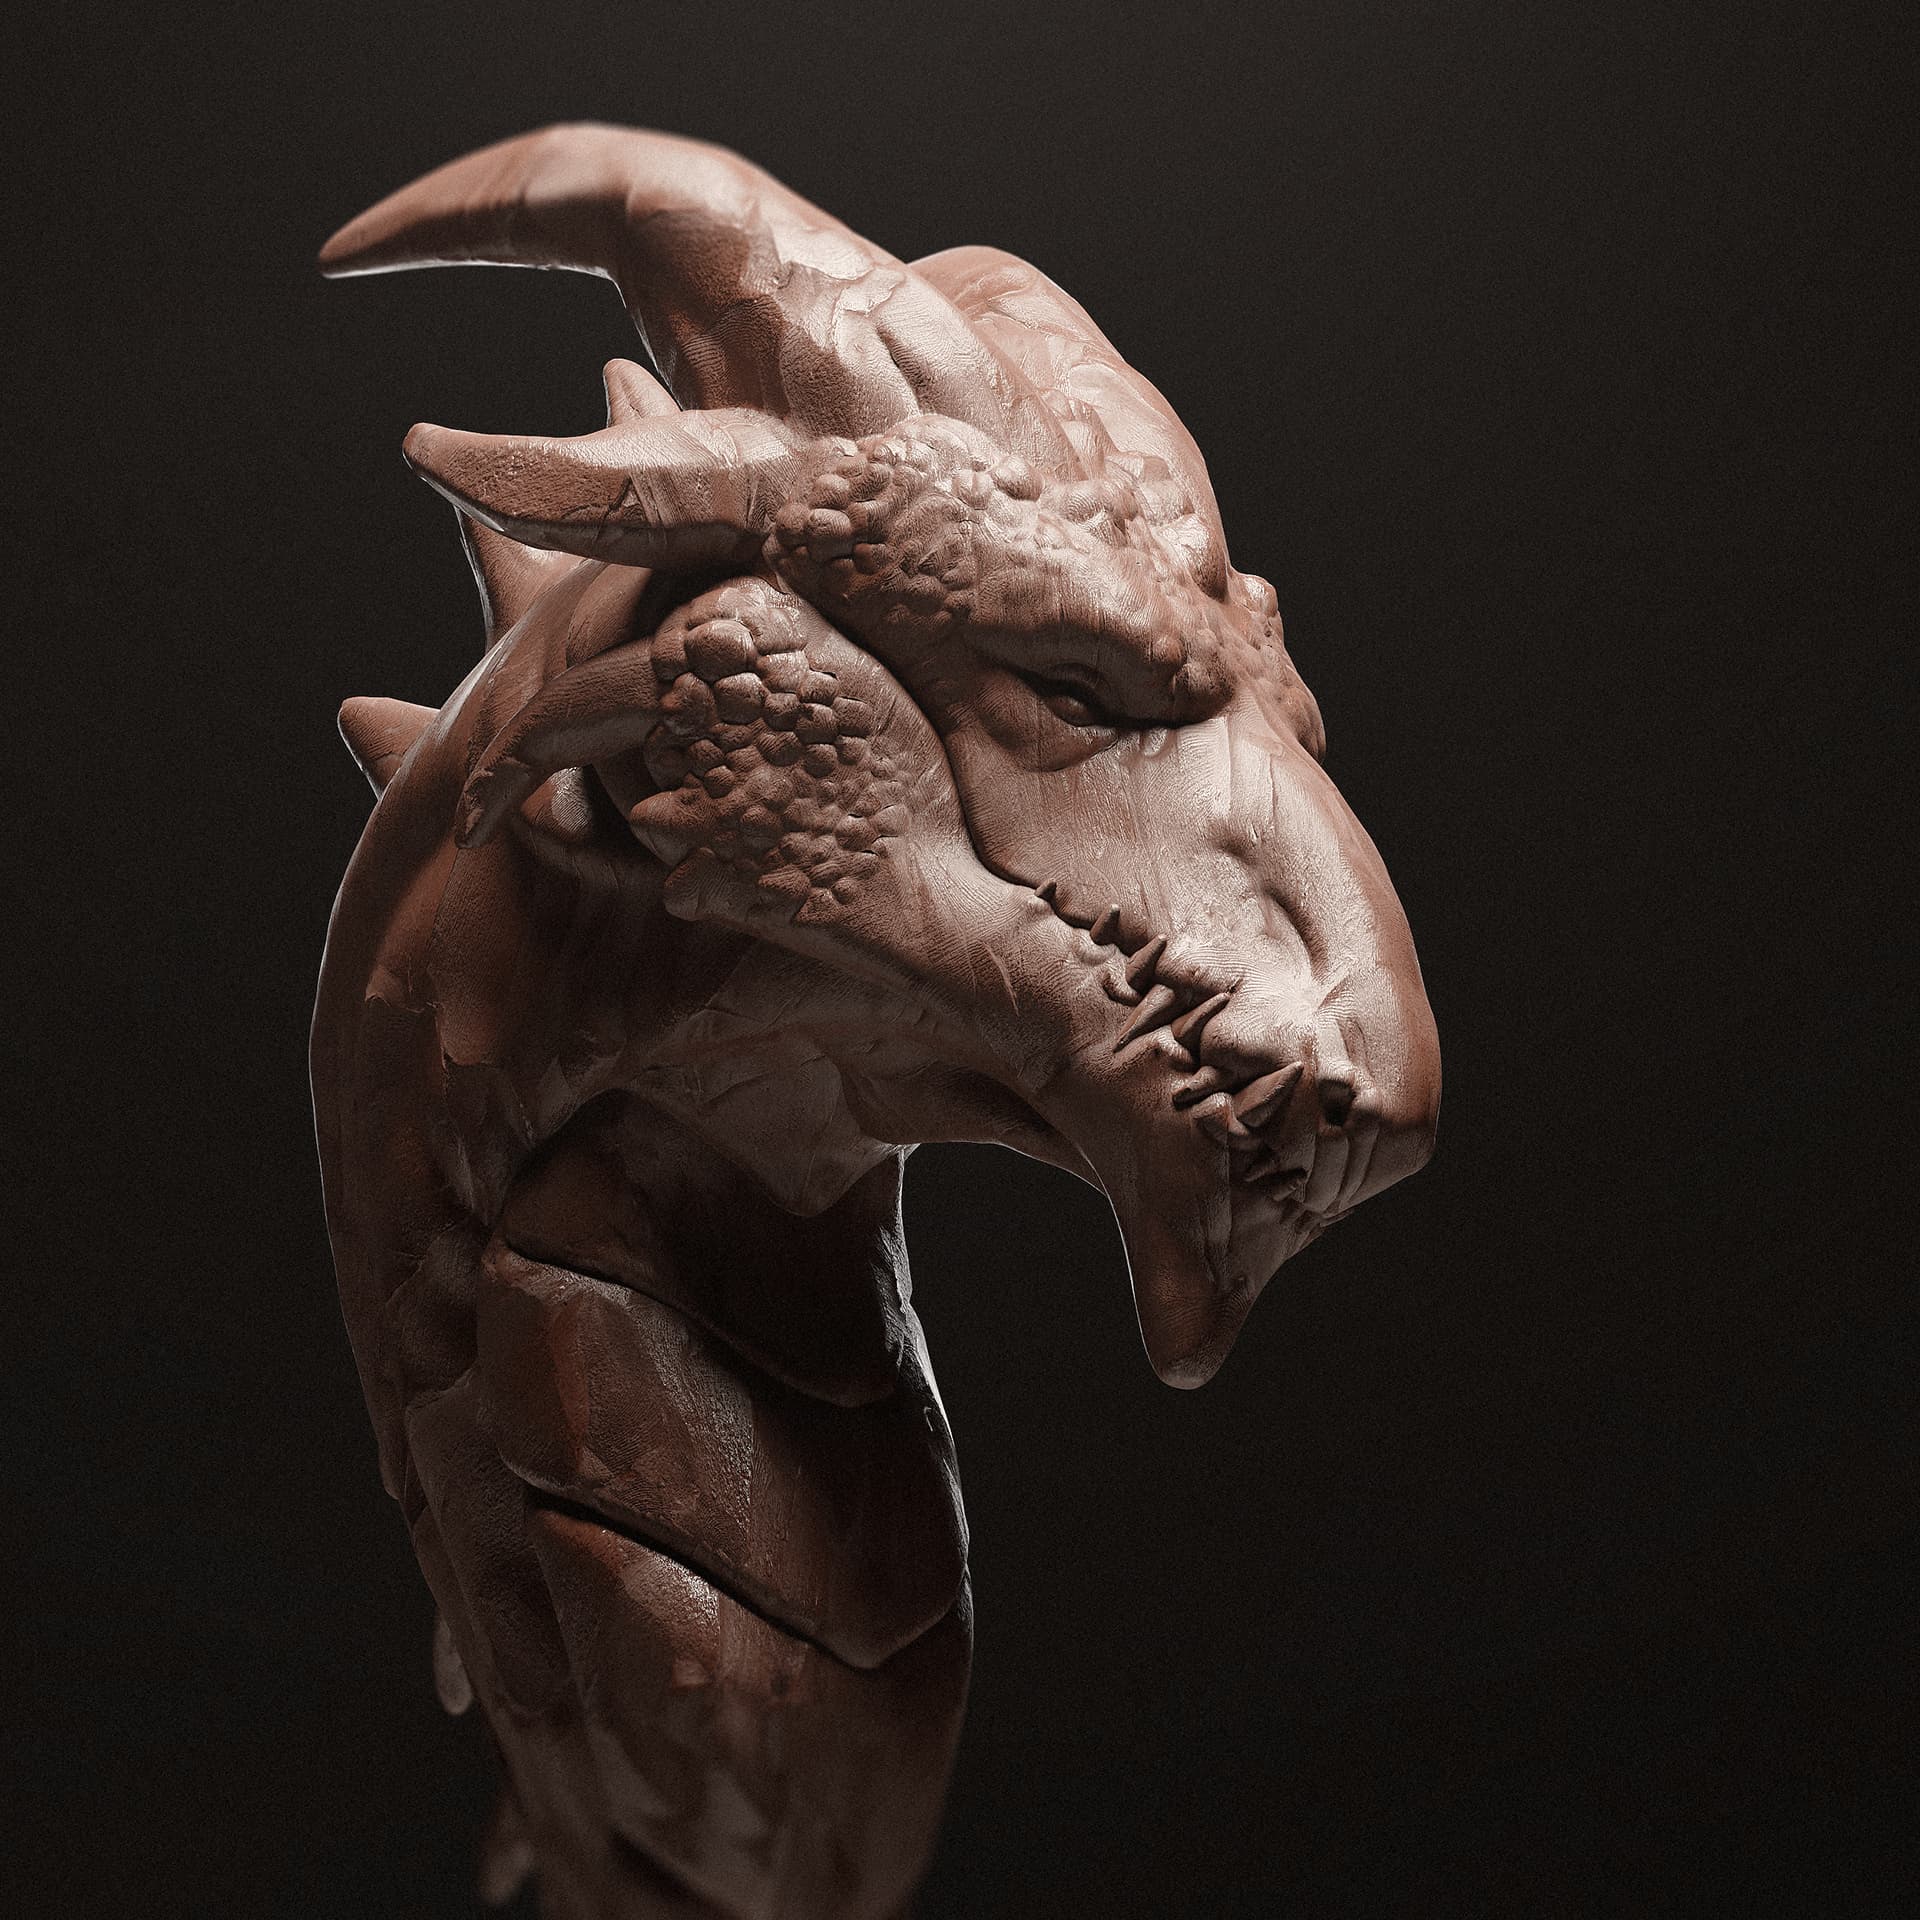 Dragon Clay - Finished Projects - Blender Artists Community